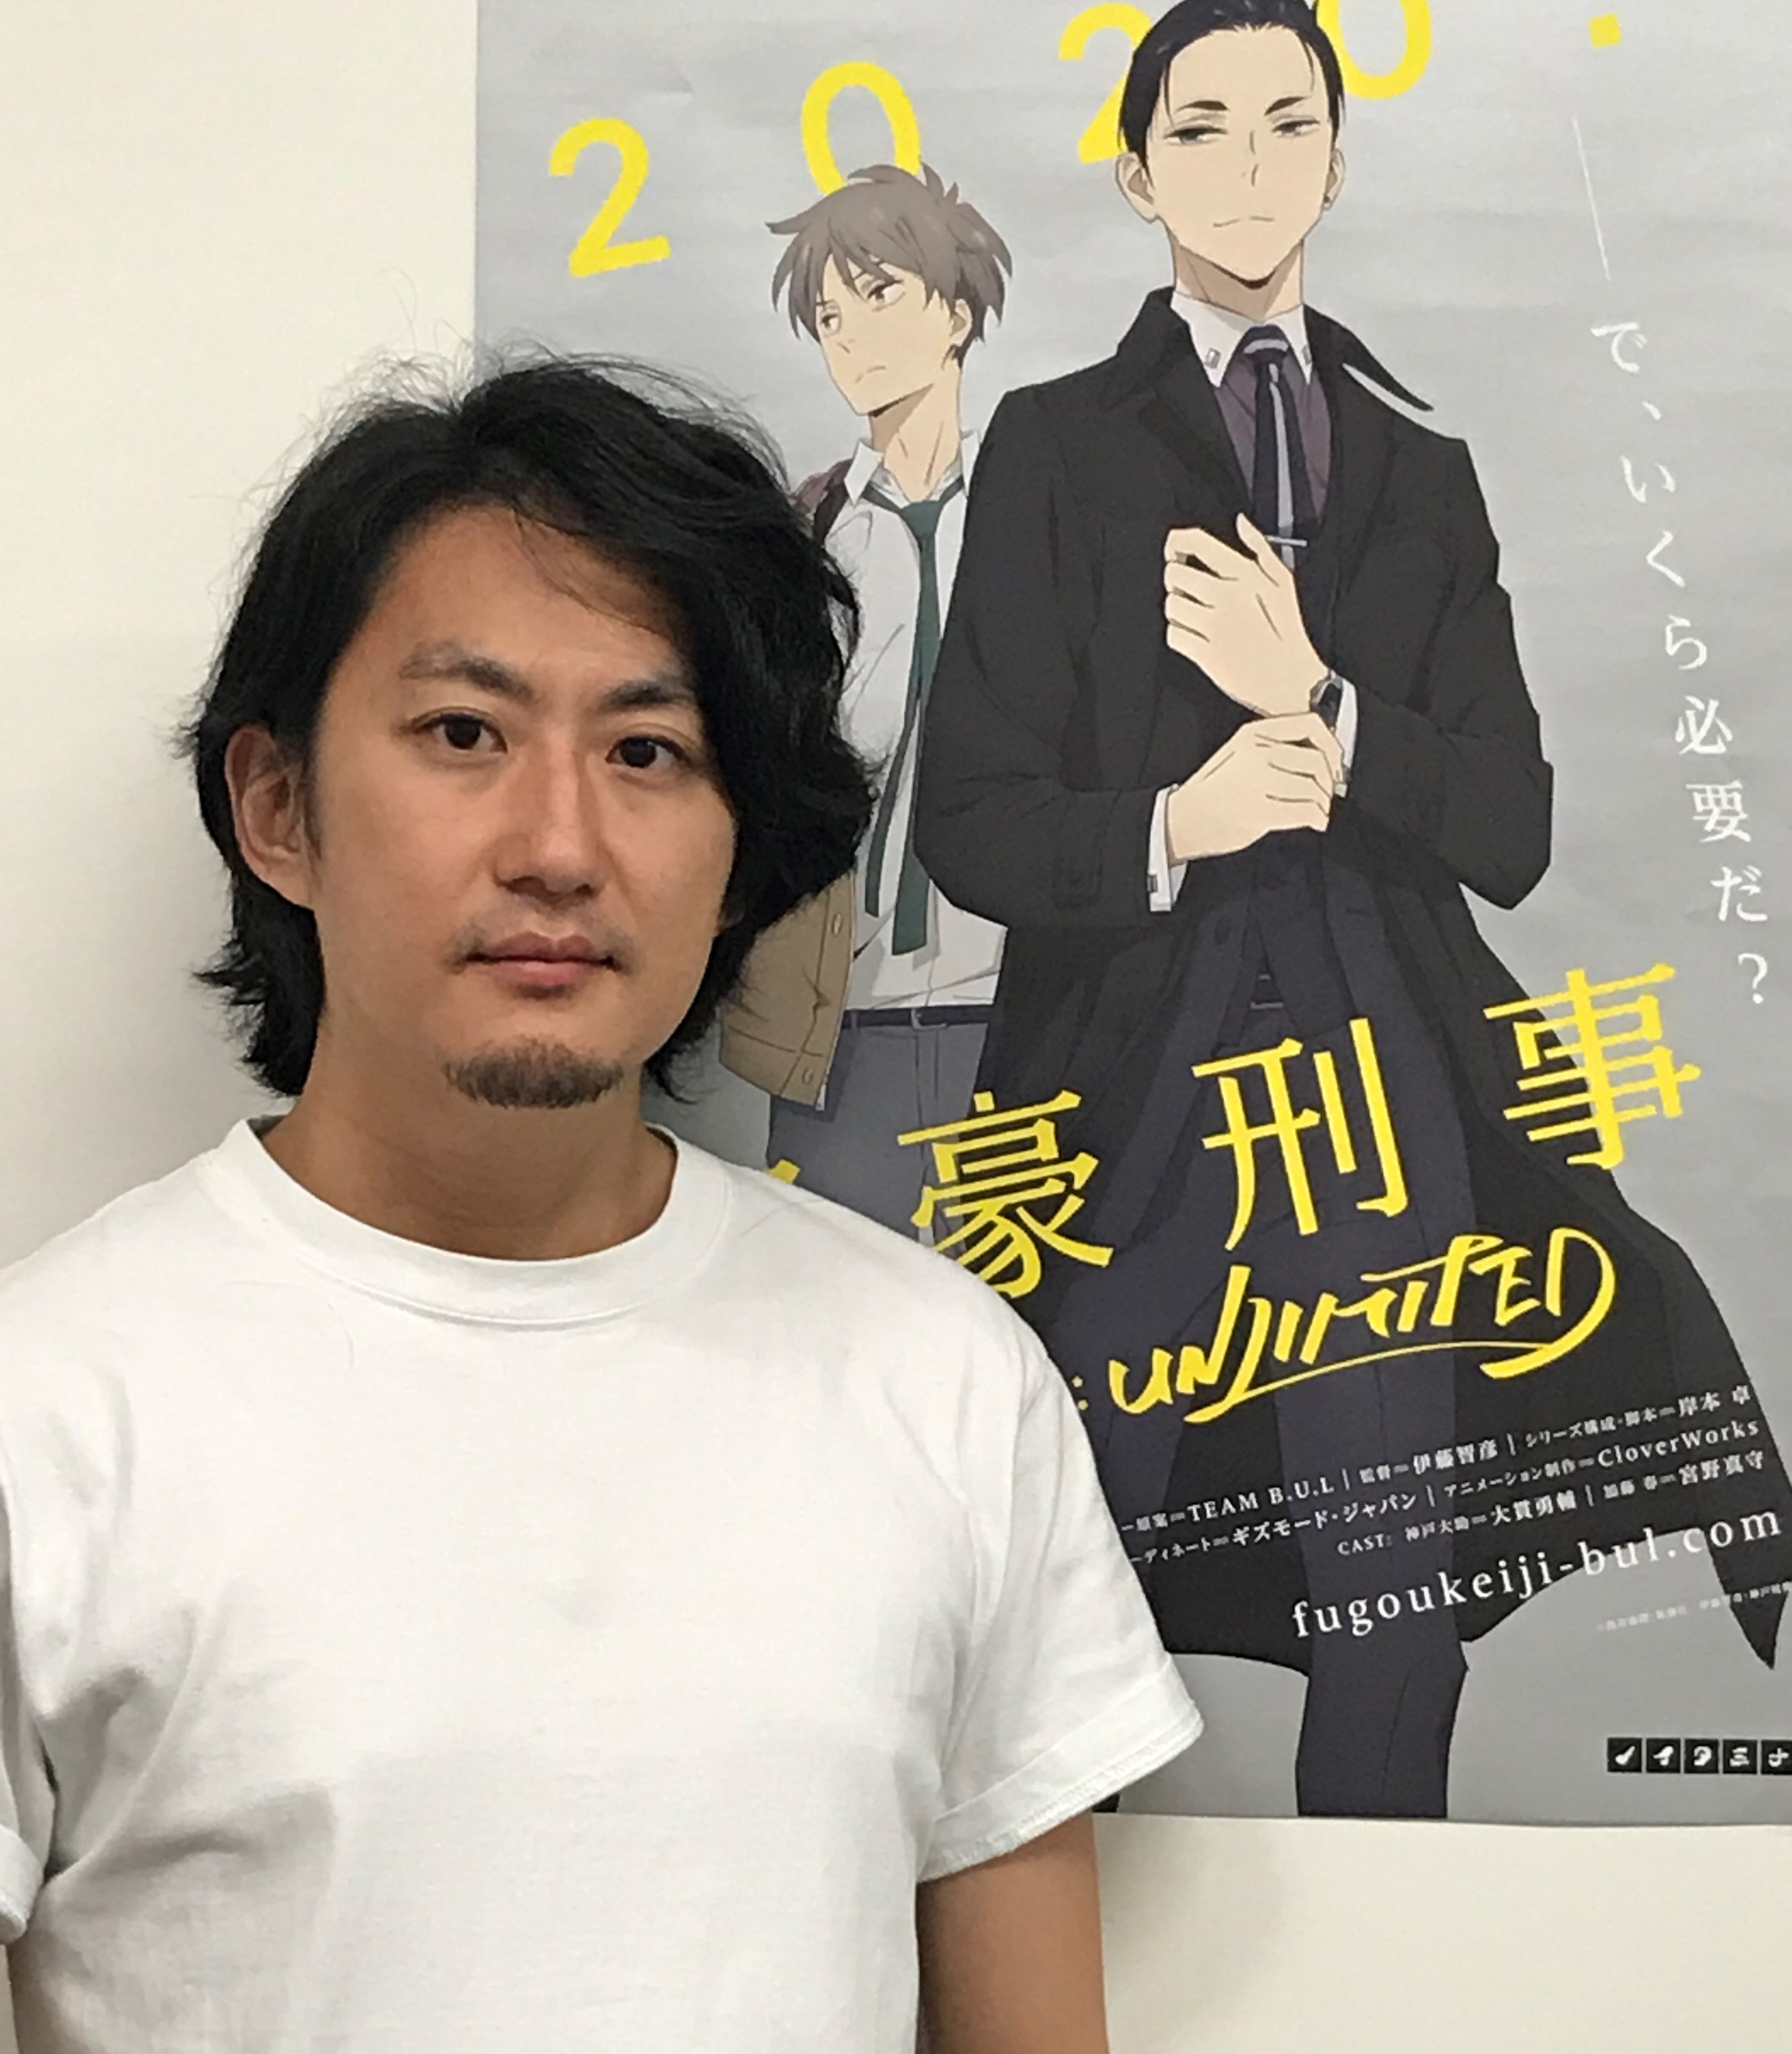 Taku Matsuo from “The Millionaire Detective Balance:UNLIMITED” – Producer